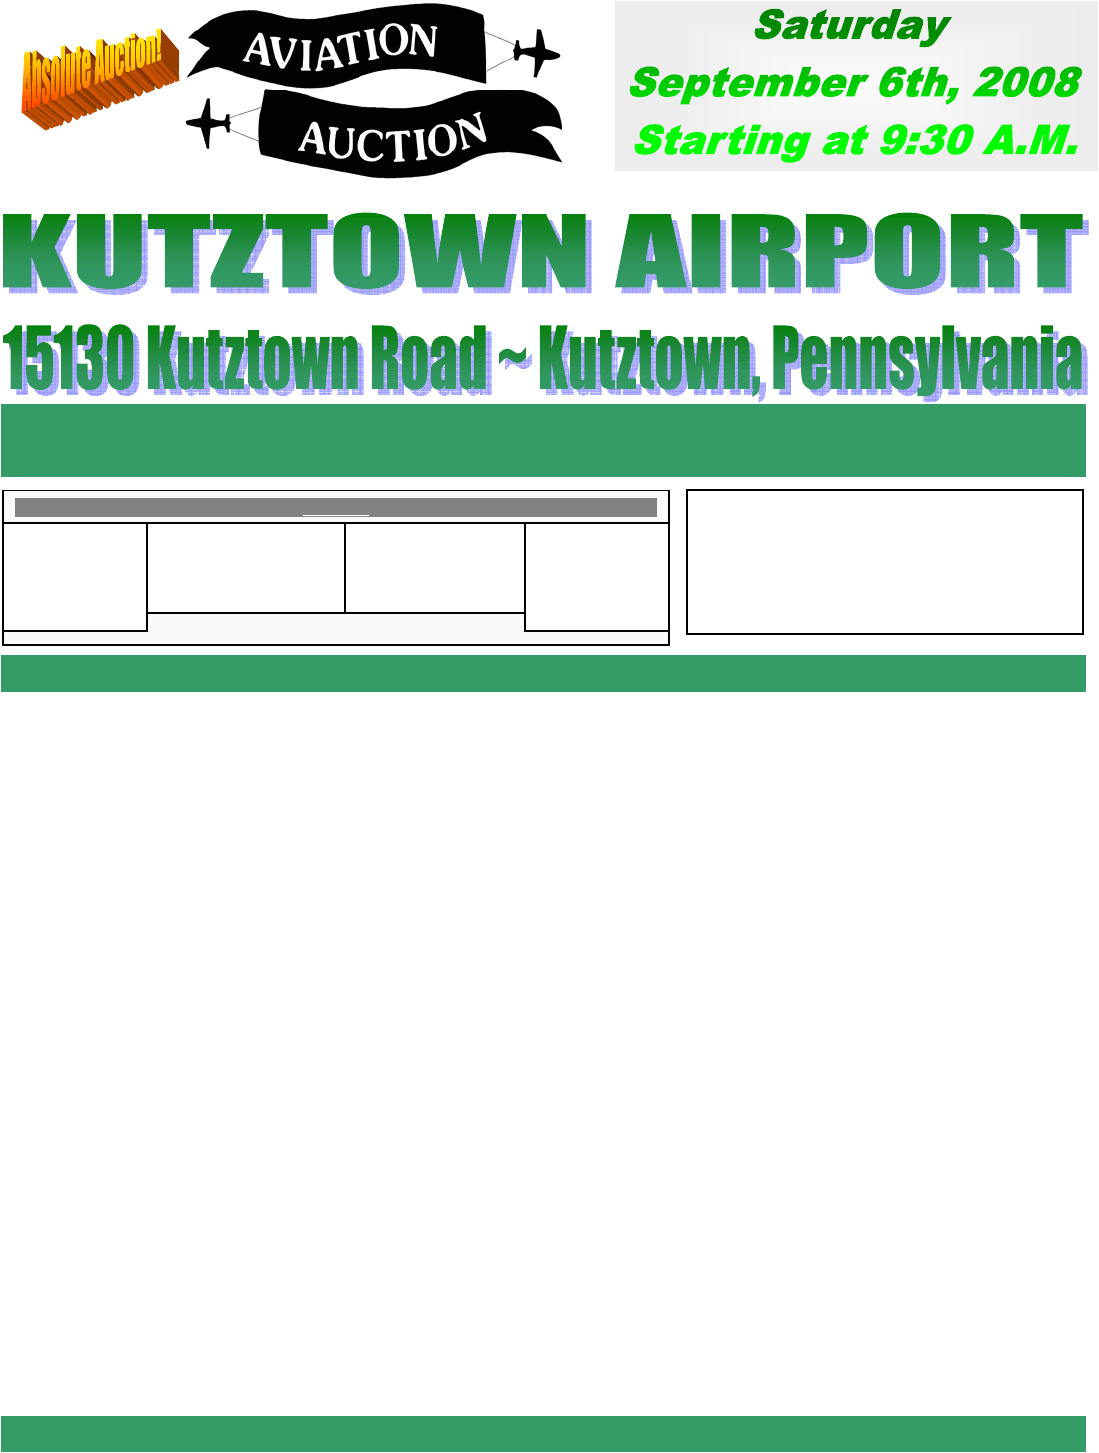 preview kutztown sale bill information monarch lawn mower manuals lawn mower manuals the best lawn mower manuals collection